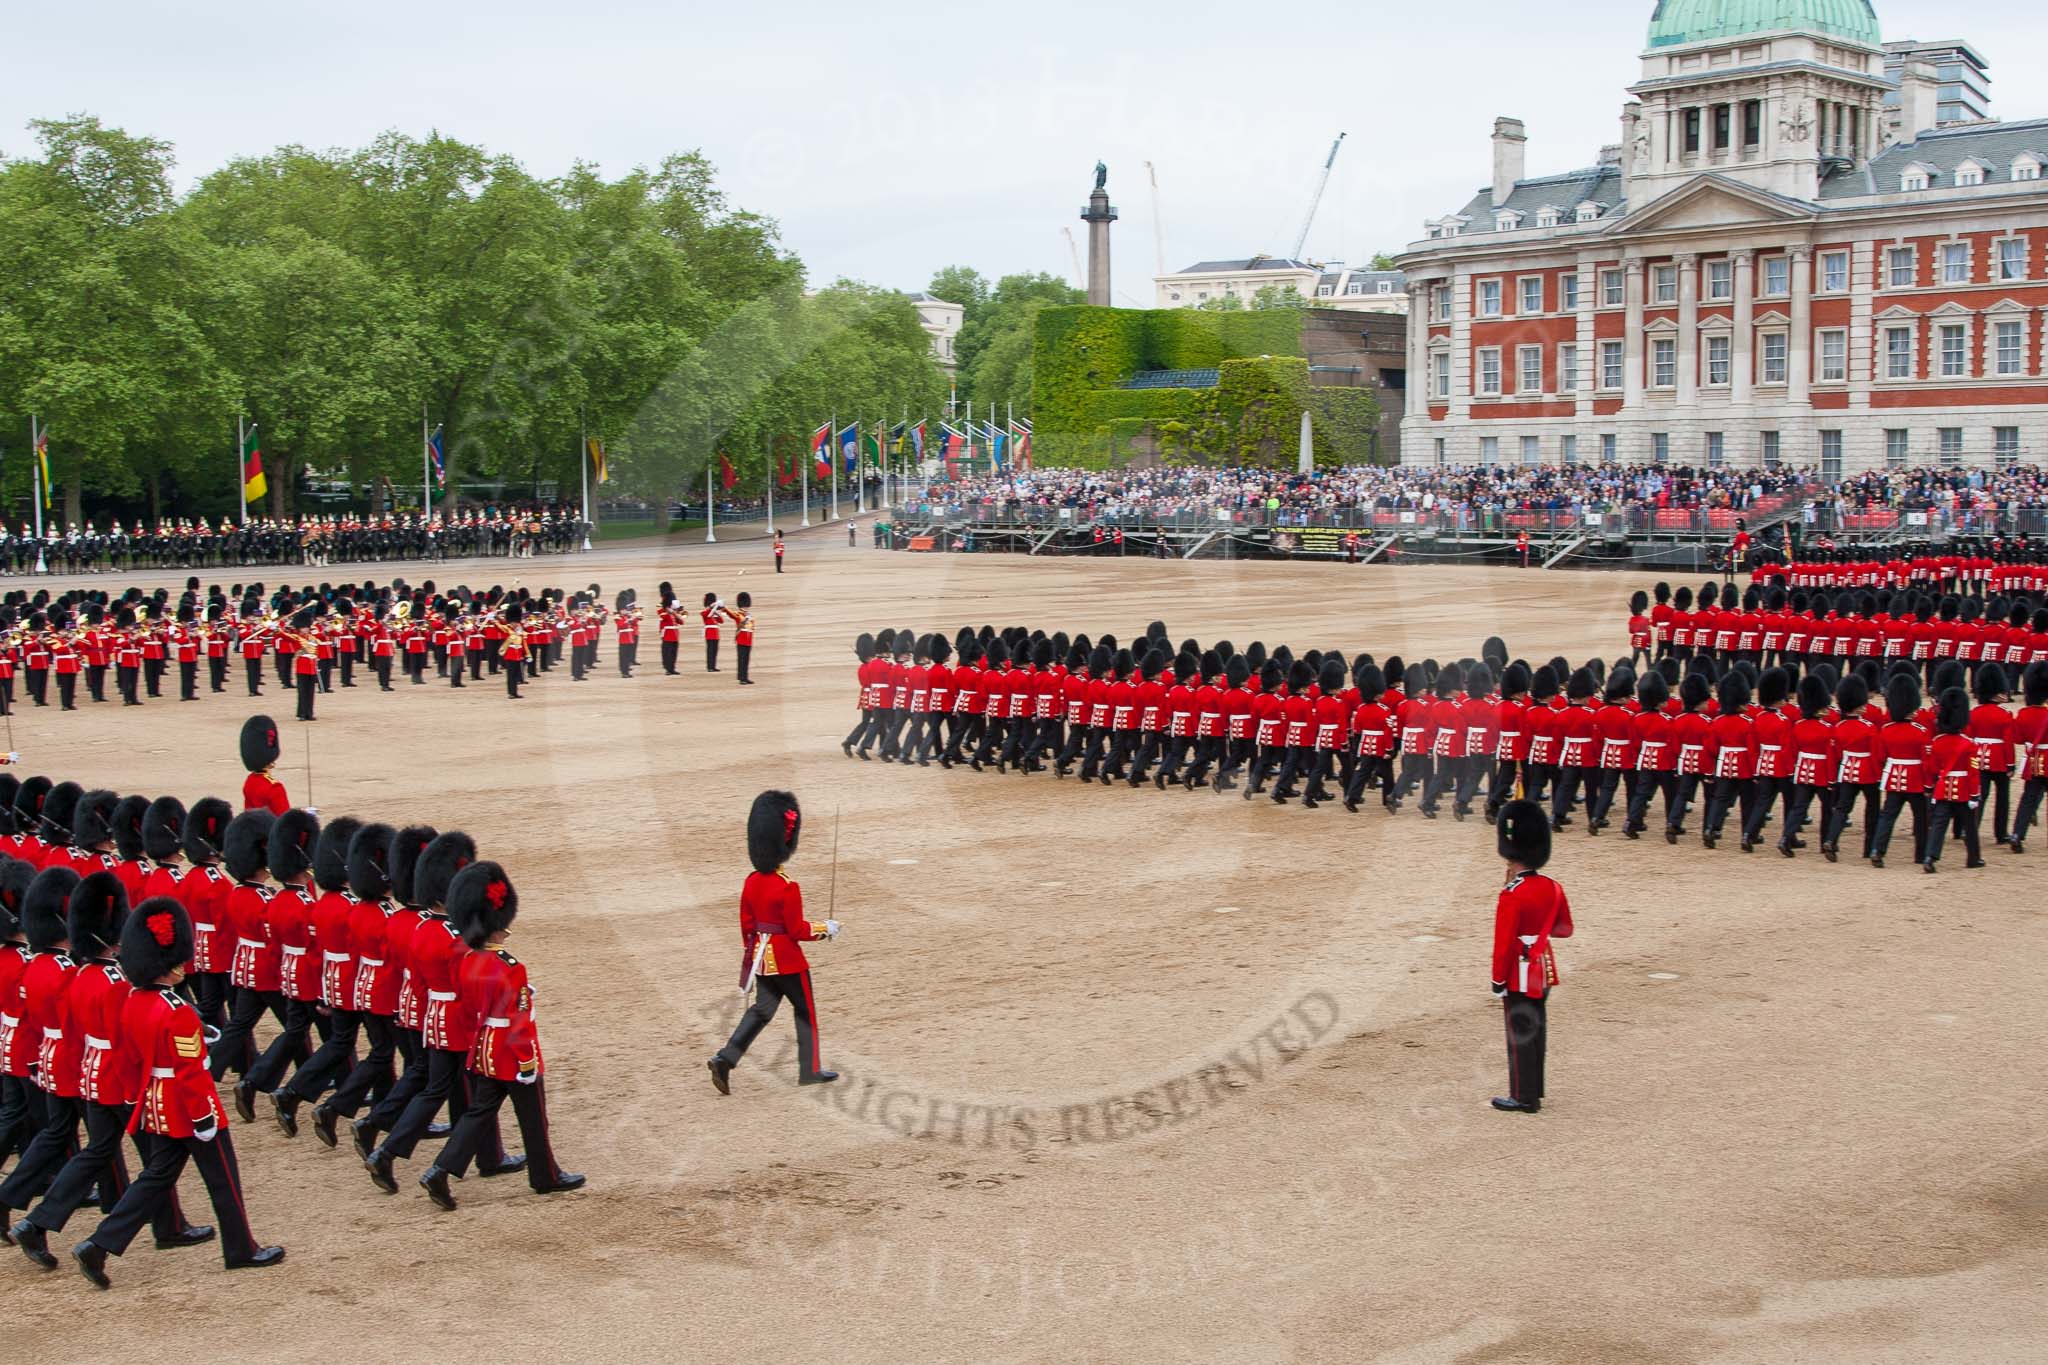 Major General's Review 2013: No. 1 to No. 6 Guard during the March Past..
Horse Guards Parade, Westminster,
London SW1,

United Kingdom,
on 01 June 2013 at 11:36, image #514